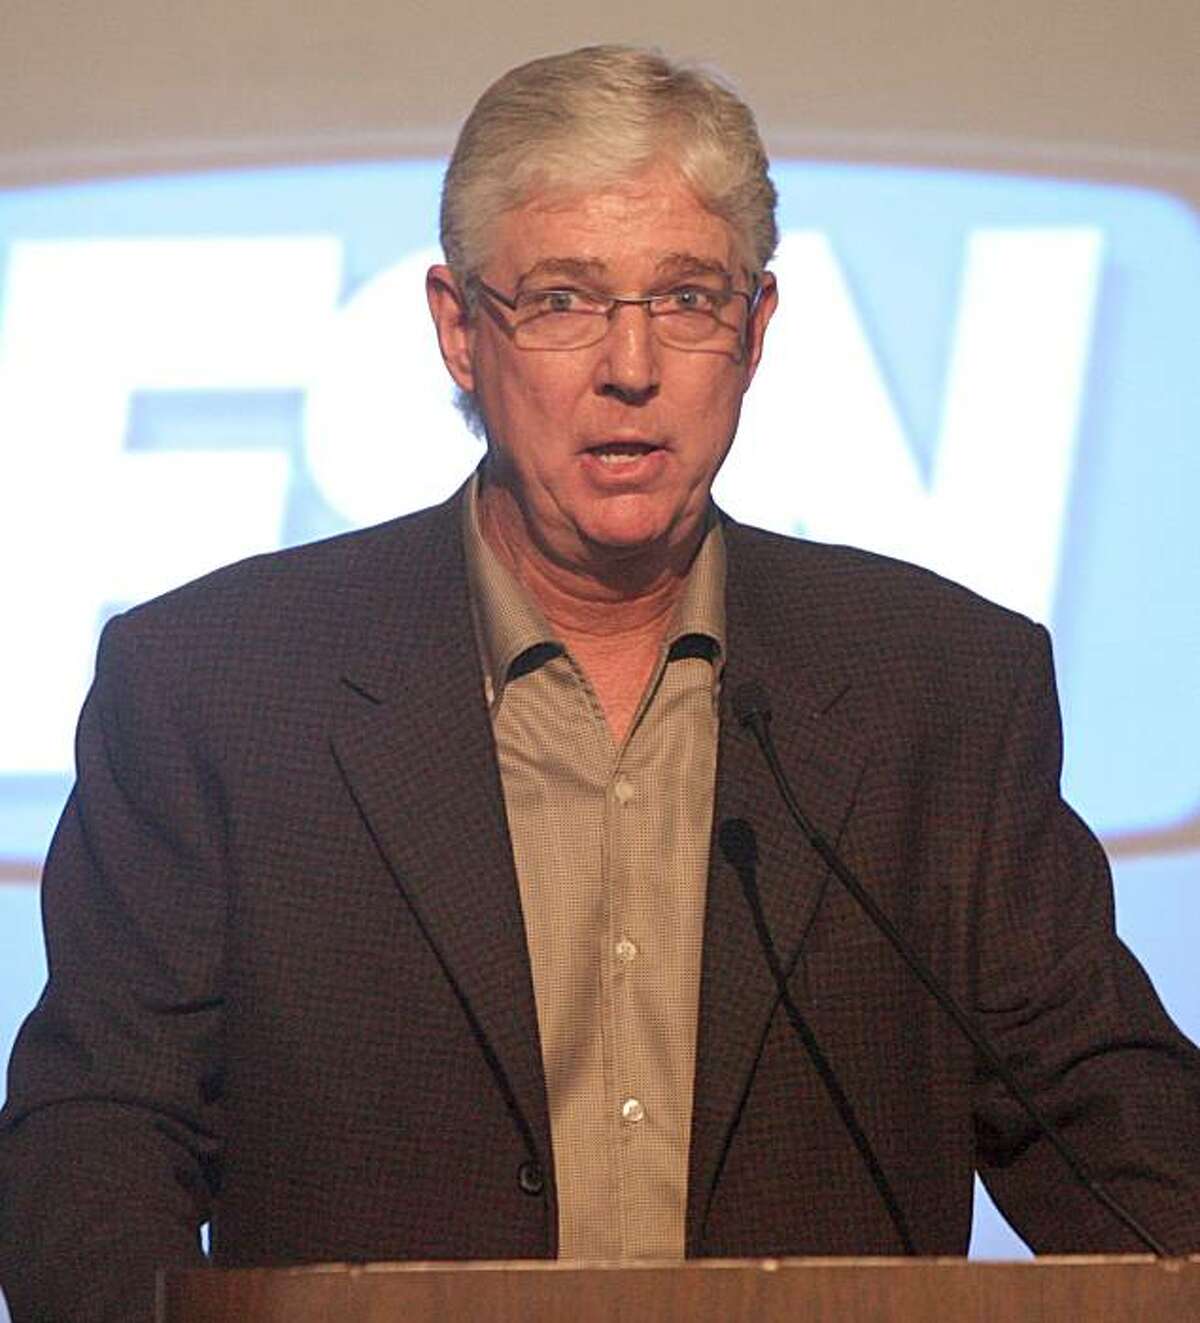 Mike Krukow speaks at the Annual Fox Sports Bay Area luncheon on Treasure Island Event on 2/8/07 in San Francisco.